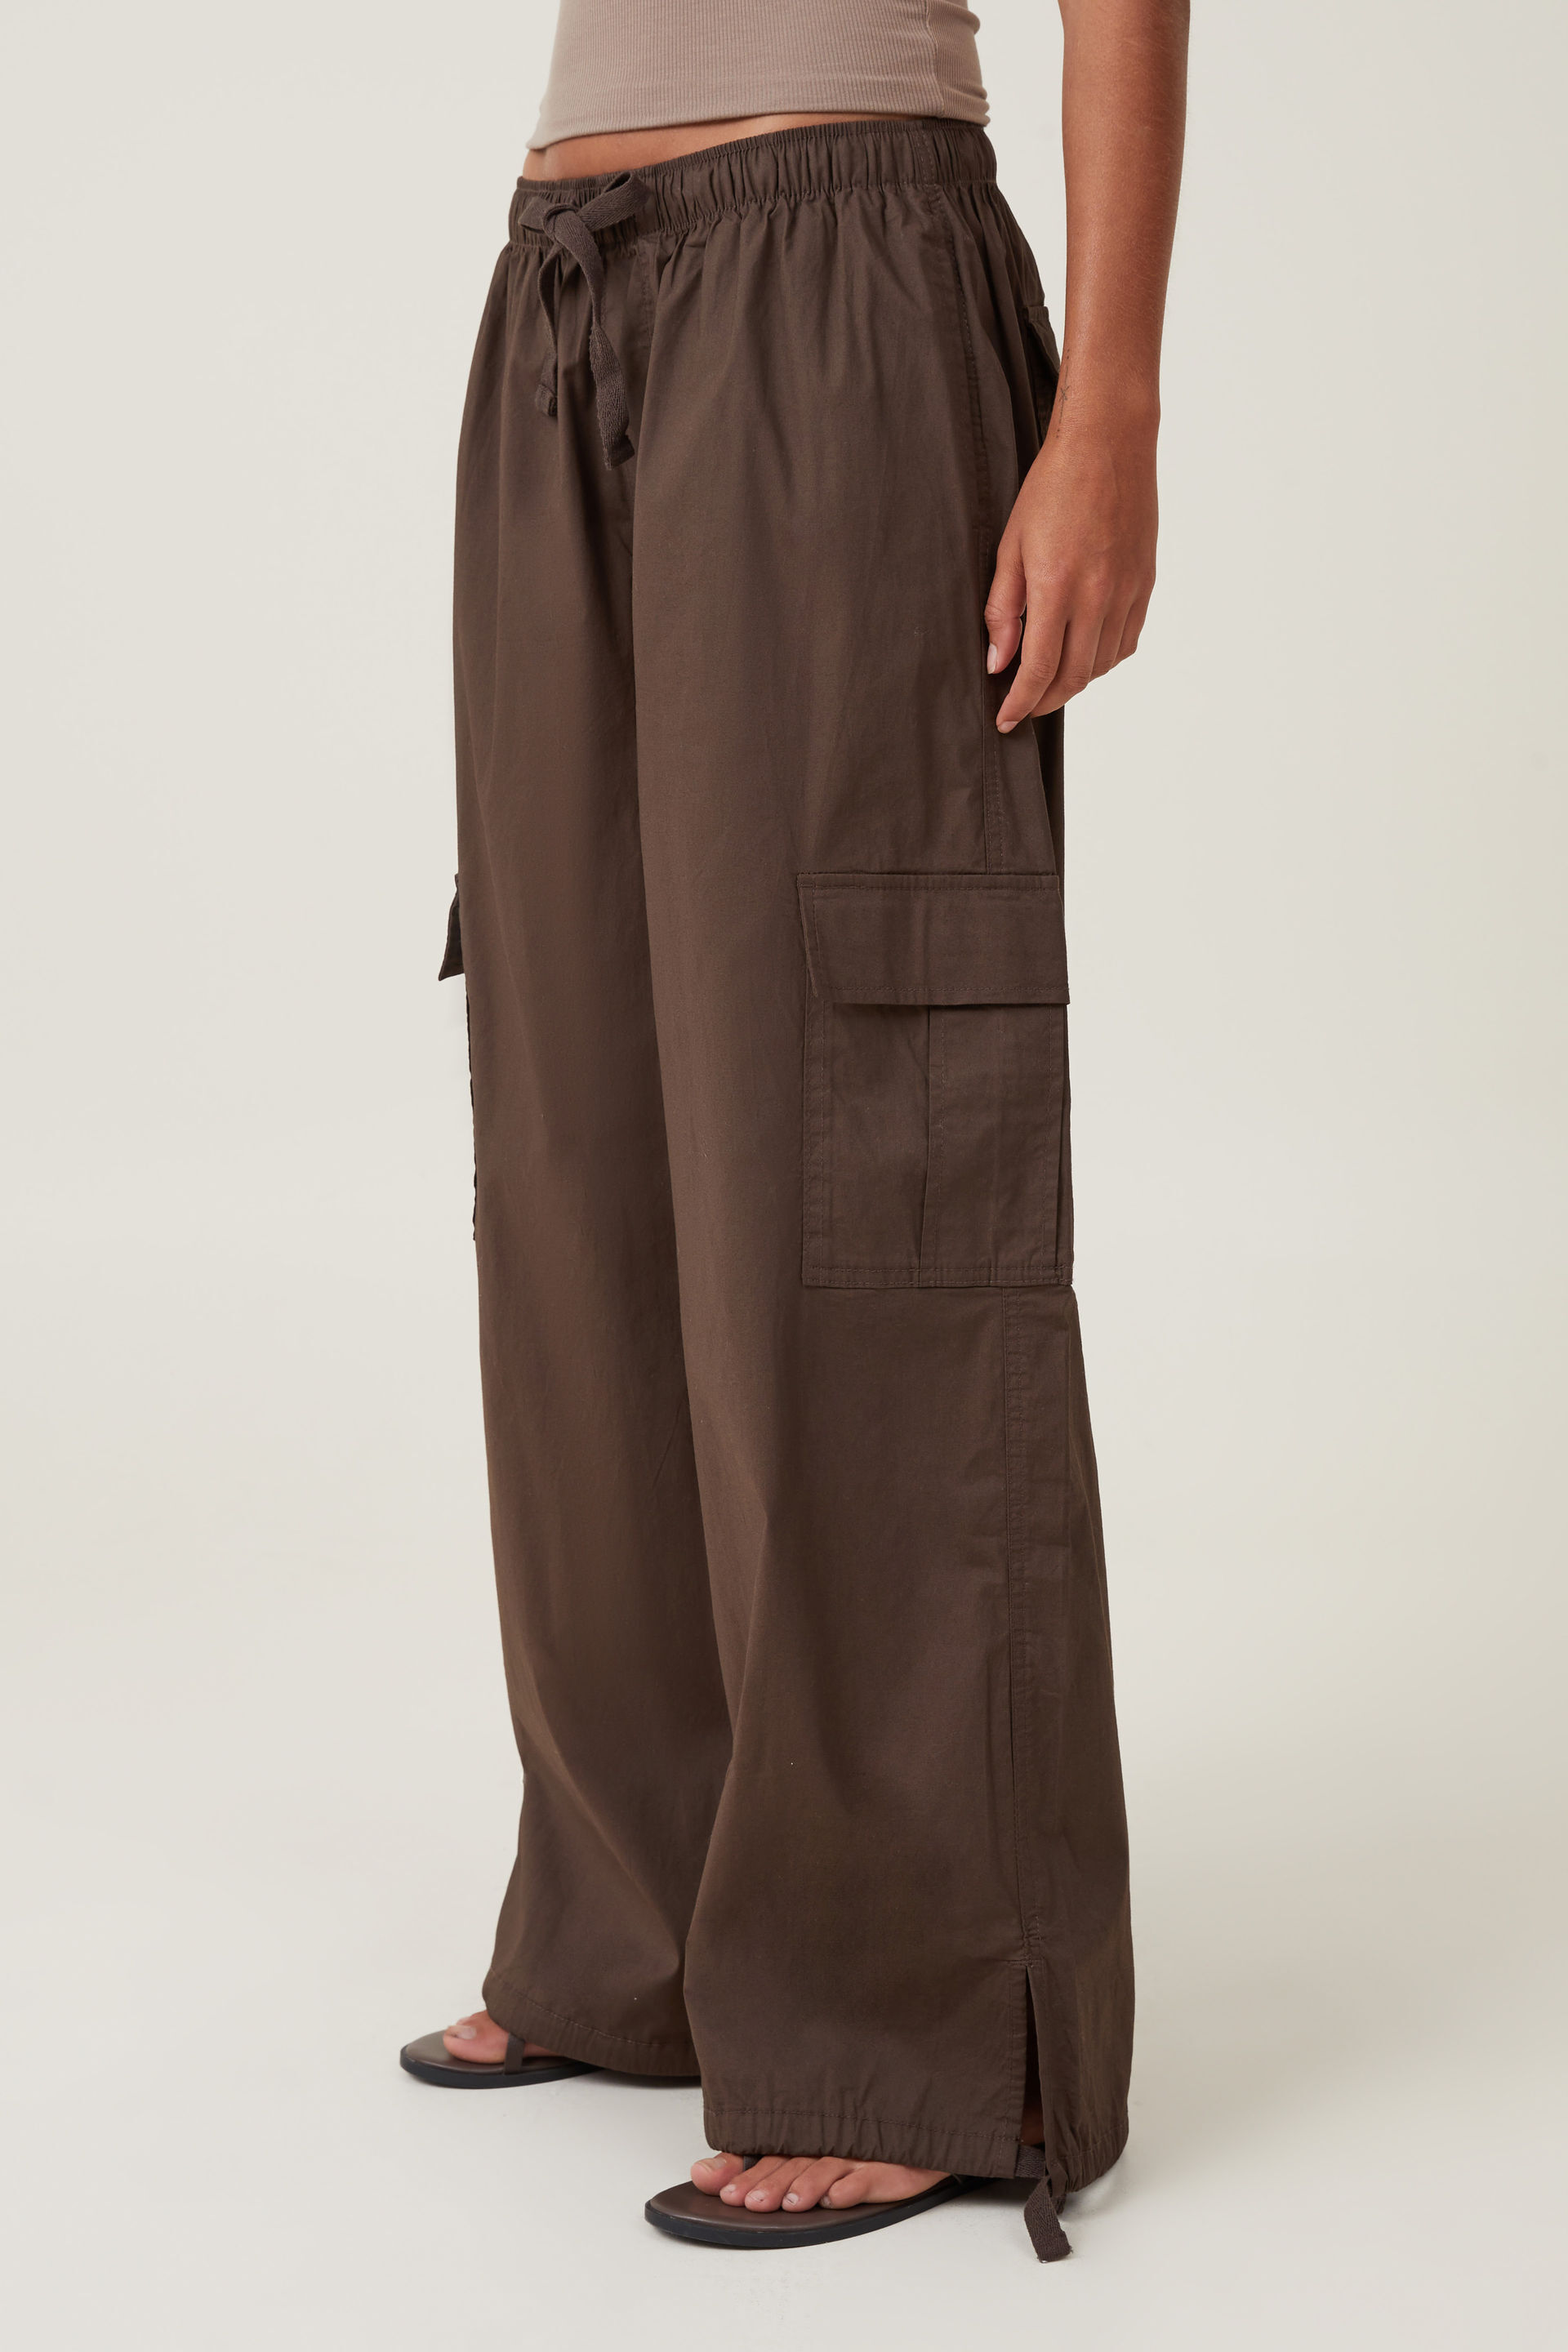 Le Cargo Croissant cotton cargo pants in brown - Jacquemus | Mytheresa